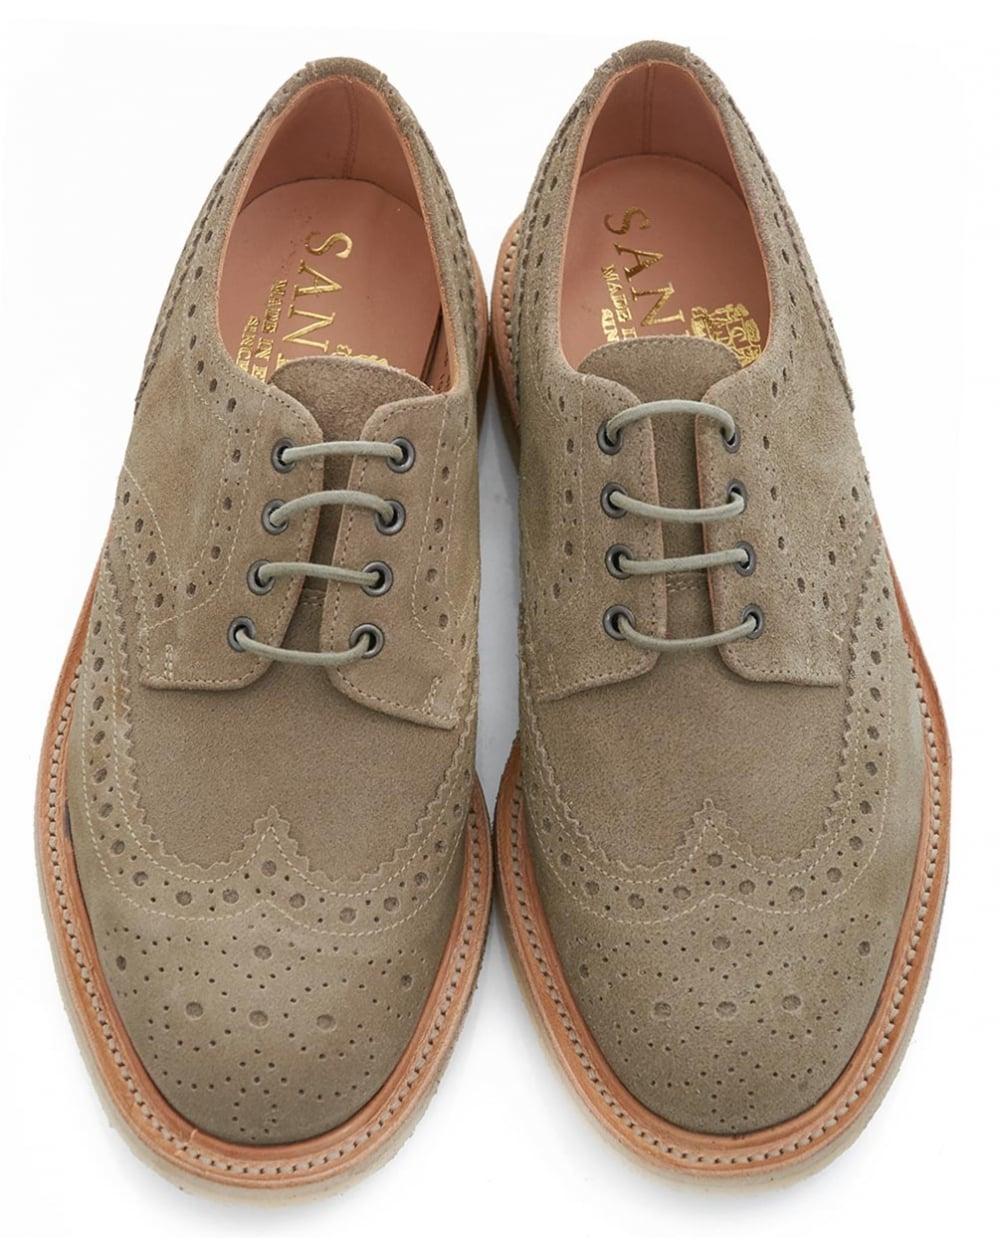 Sanders Olly Suede Brogue Shoes for Men - Lyst